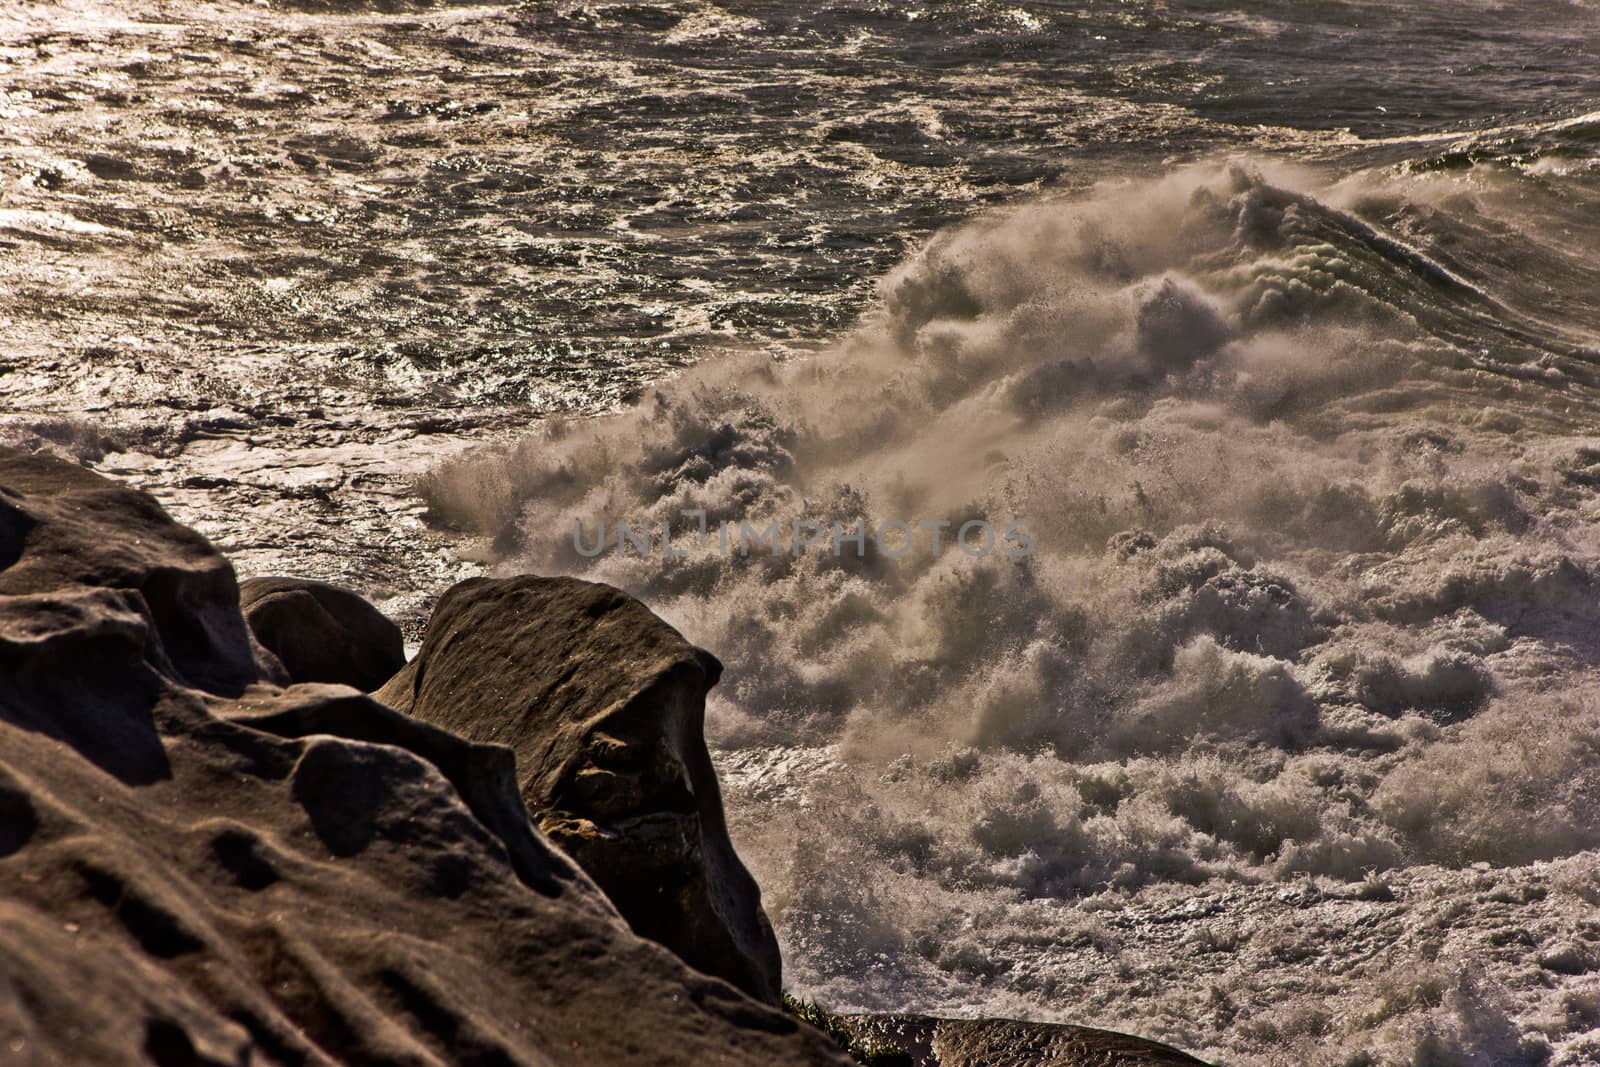 Rough surf and waves by jrstock